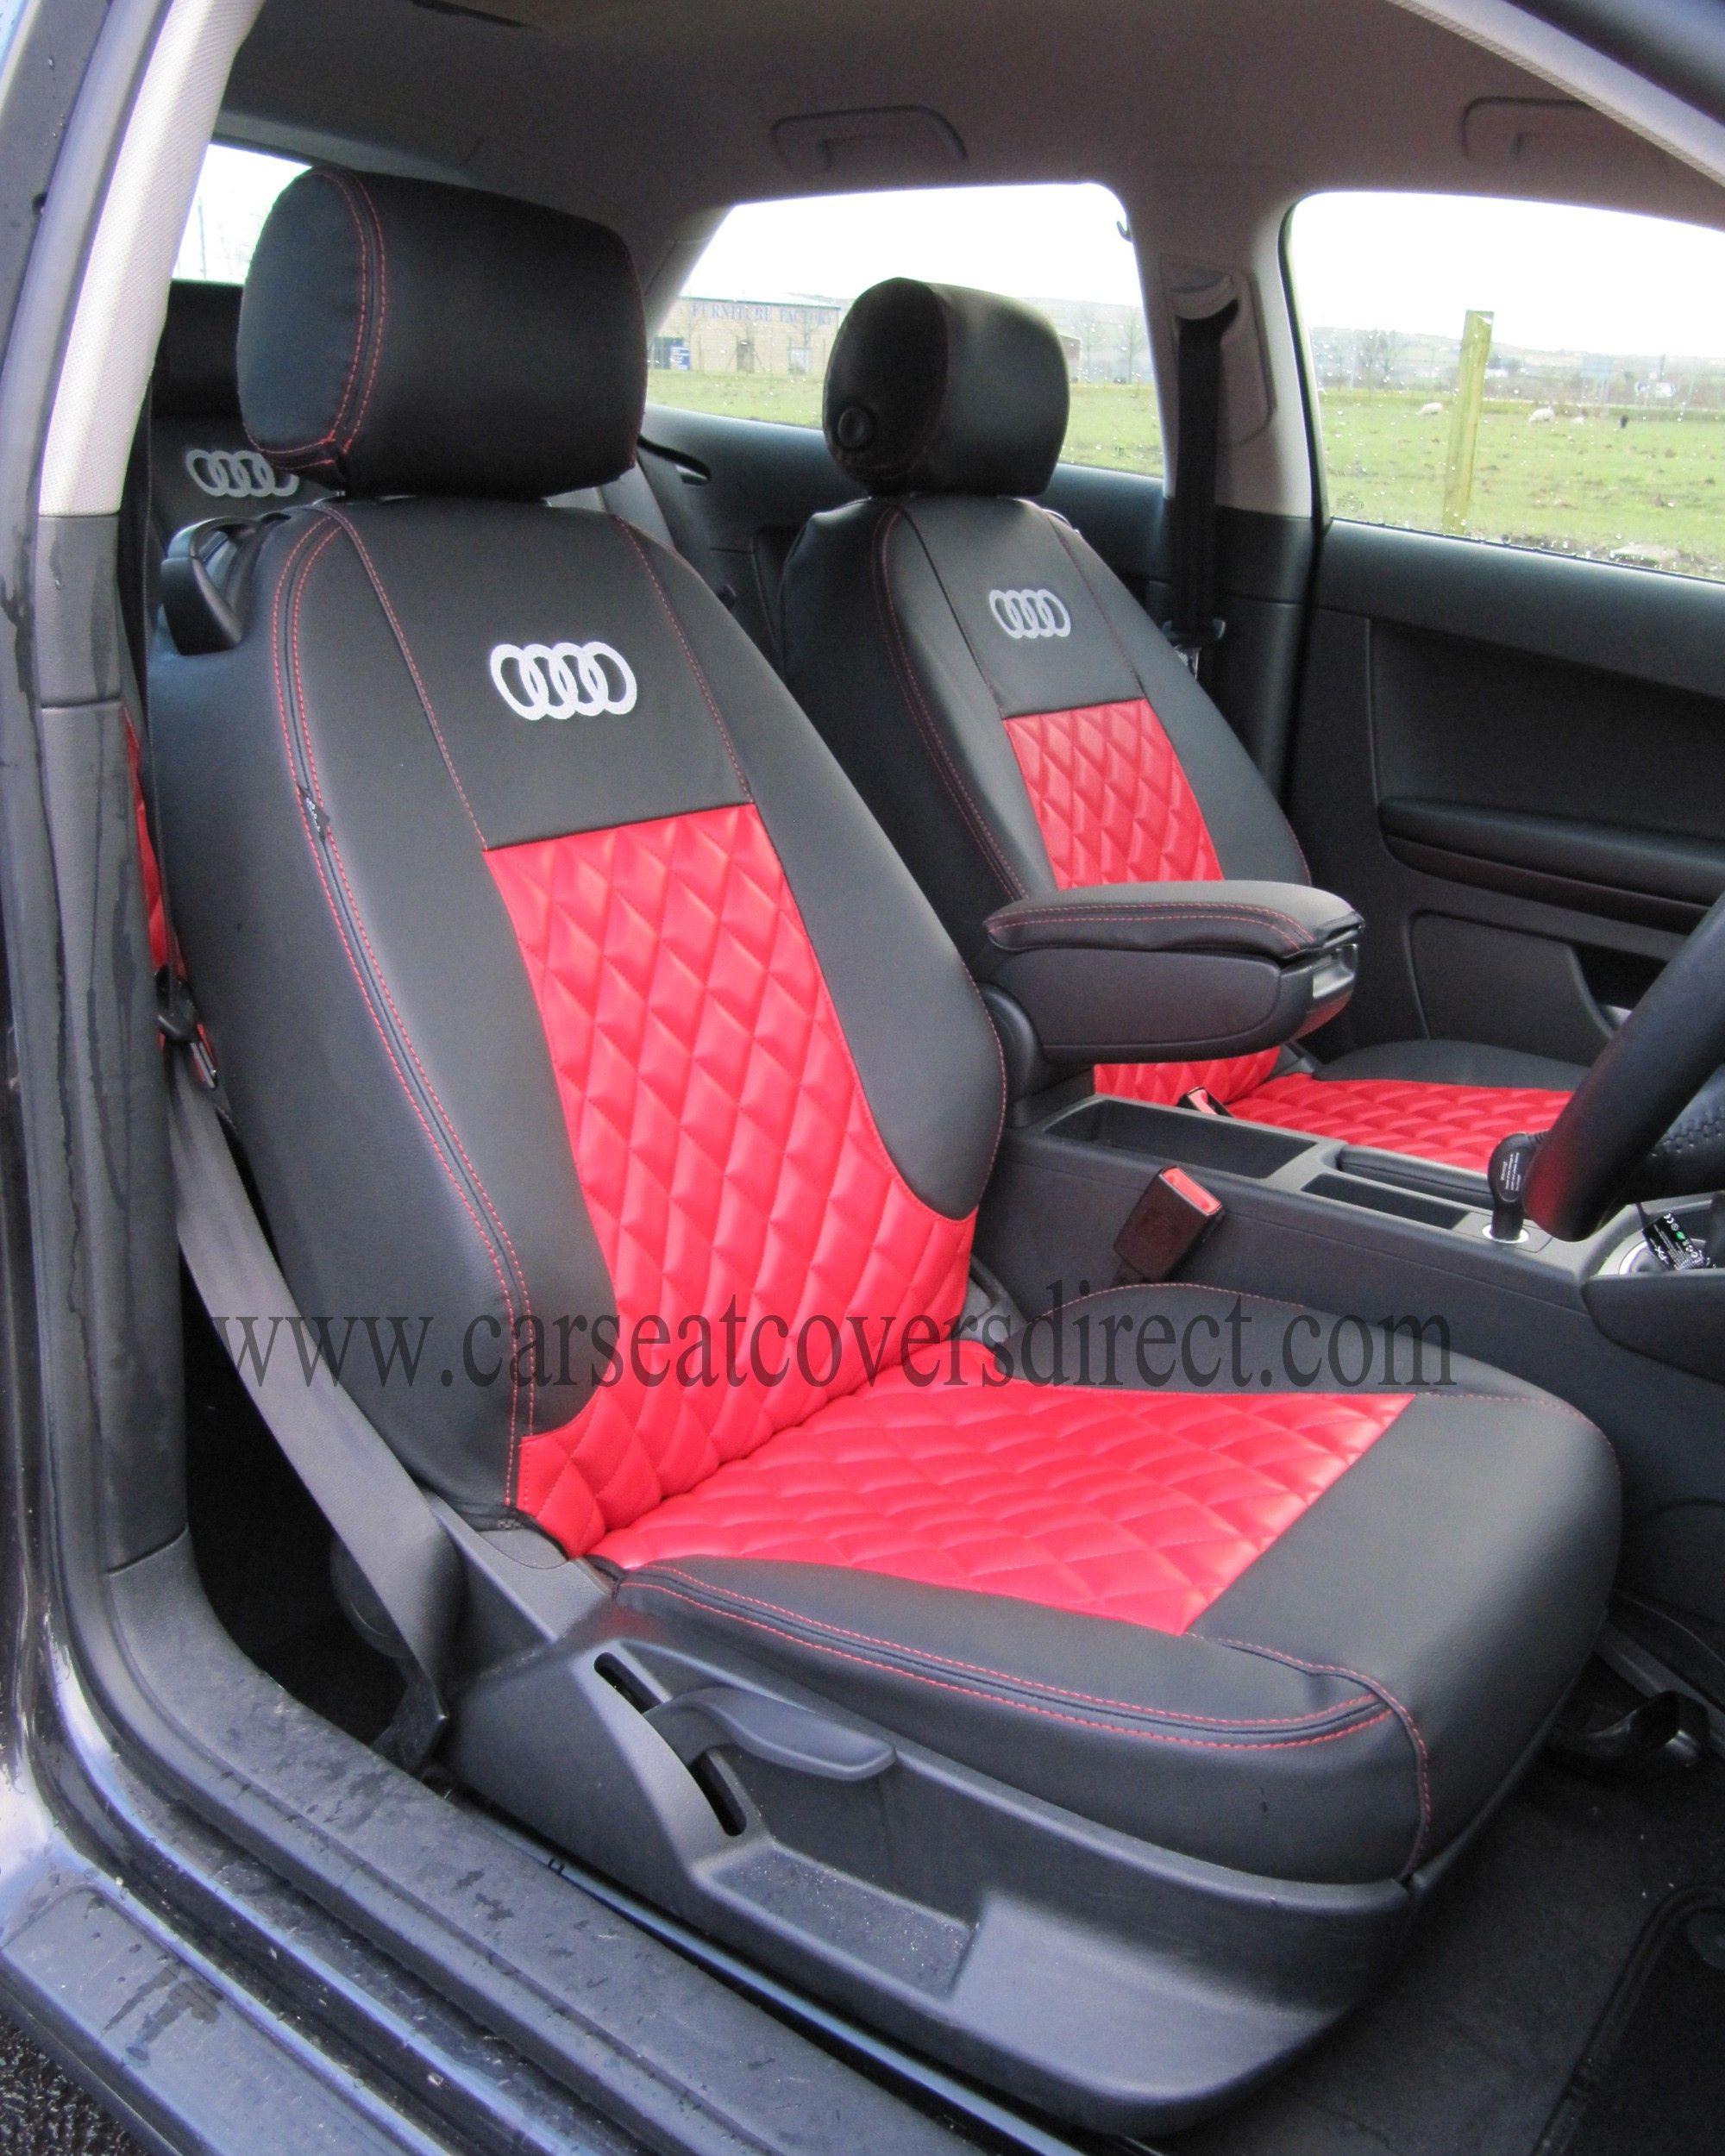 Red Diamond Car Logo - Audi A3 Seat Covers - Black & Red With Diamond Stitching Car Seat ...